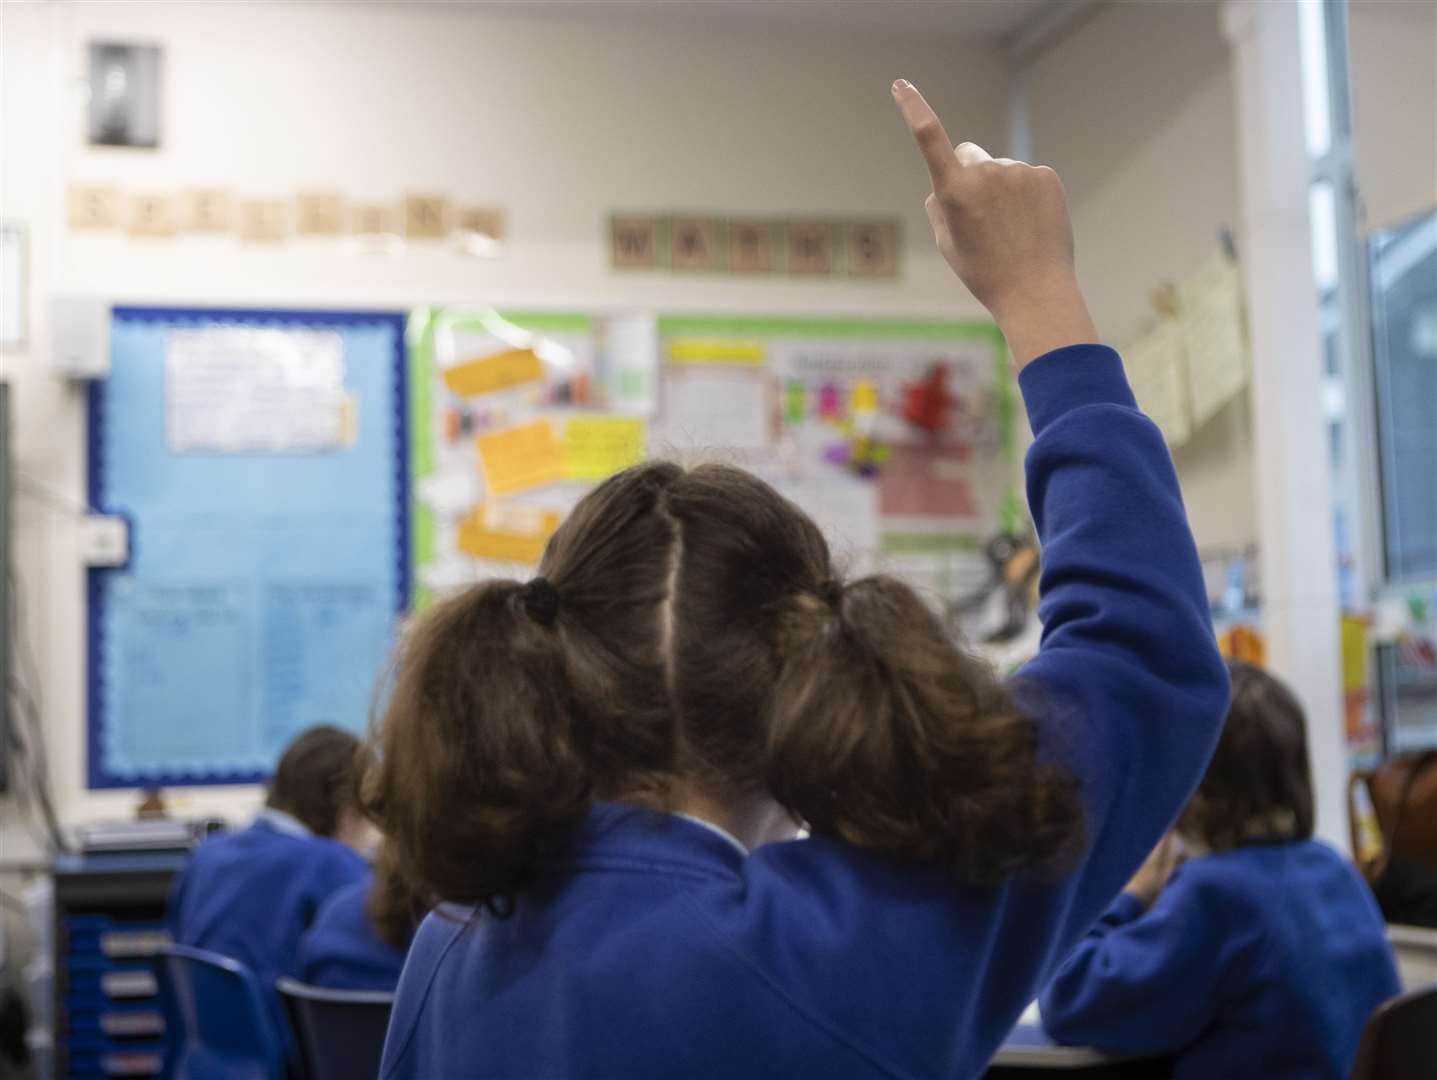 The report warned stringent infection control measures between school staff will be vital (PA)